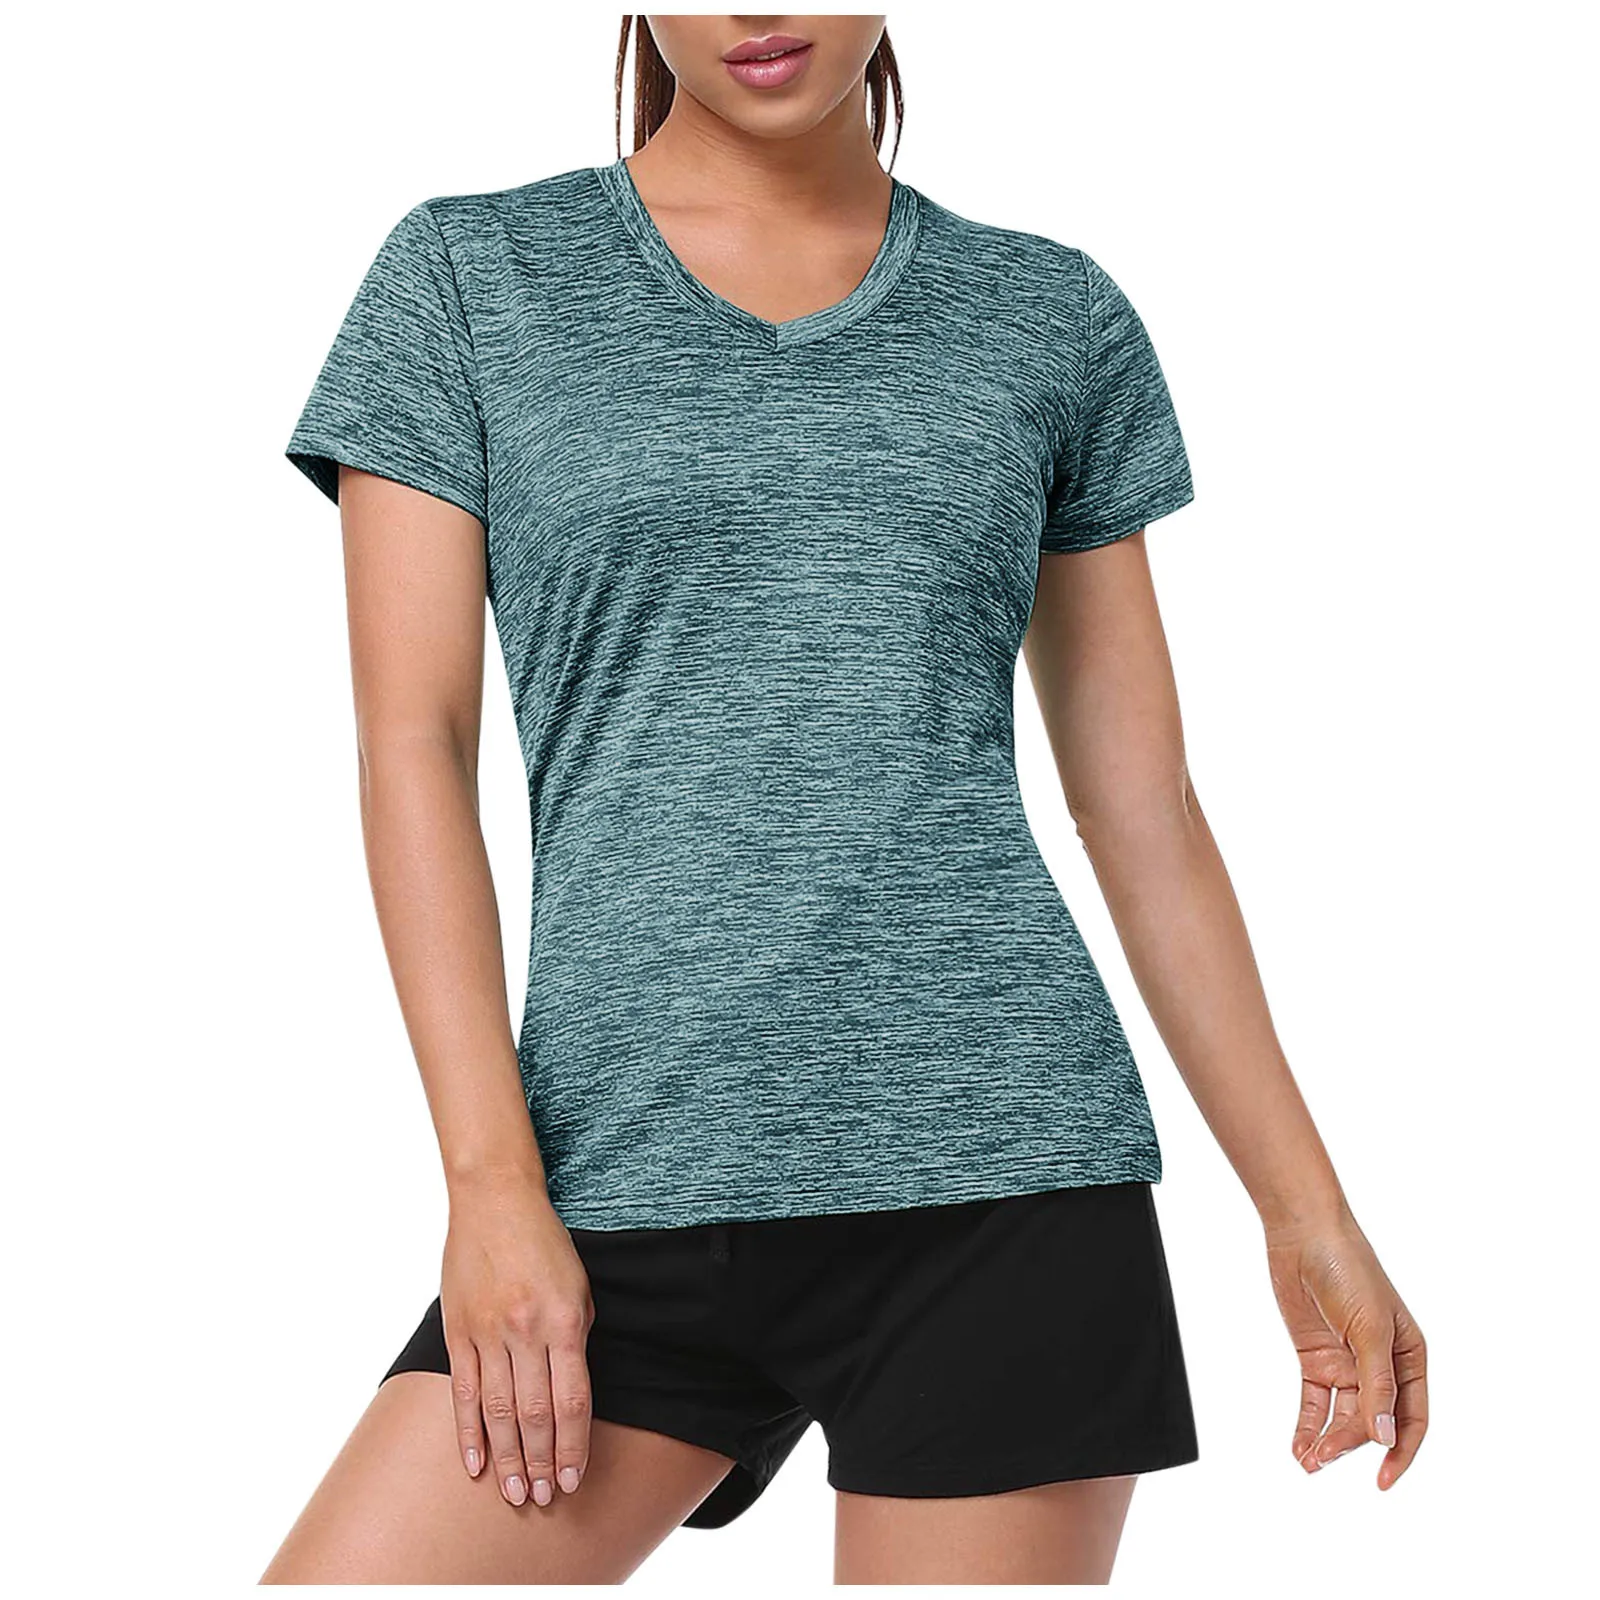 

Fitness Sports T-shirt Summer Clothes for Women Solid Color V Neck Short Sleeve Shirts Top Ladies Blusas Mujer de Moda 2022